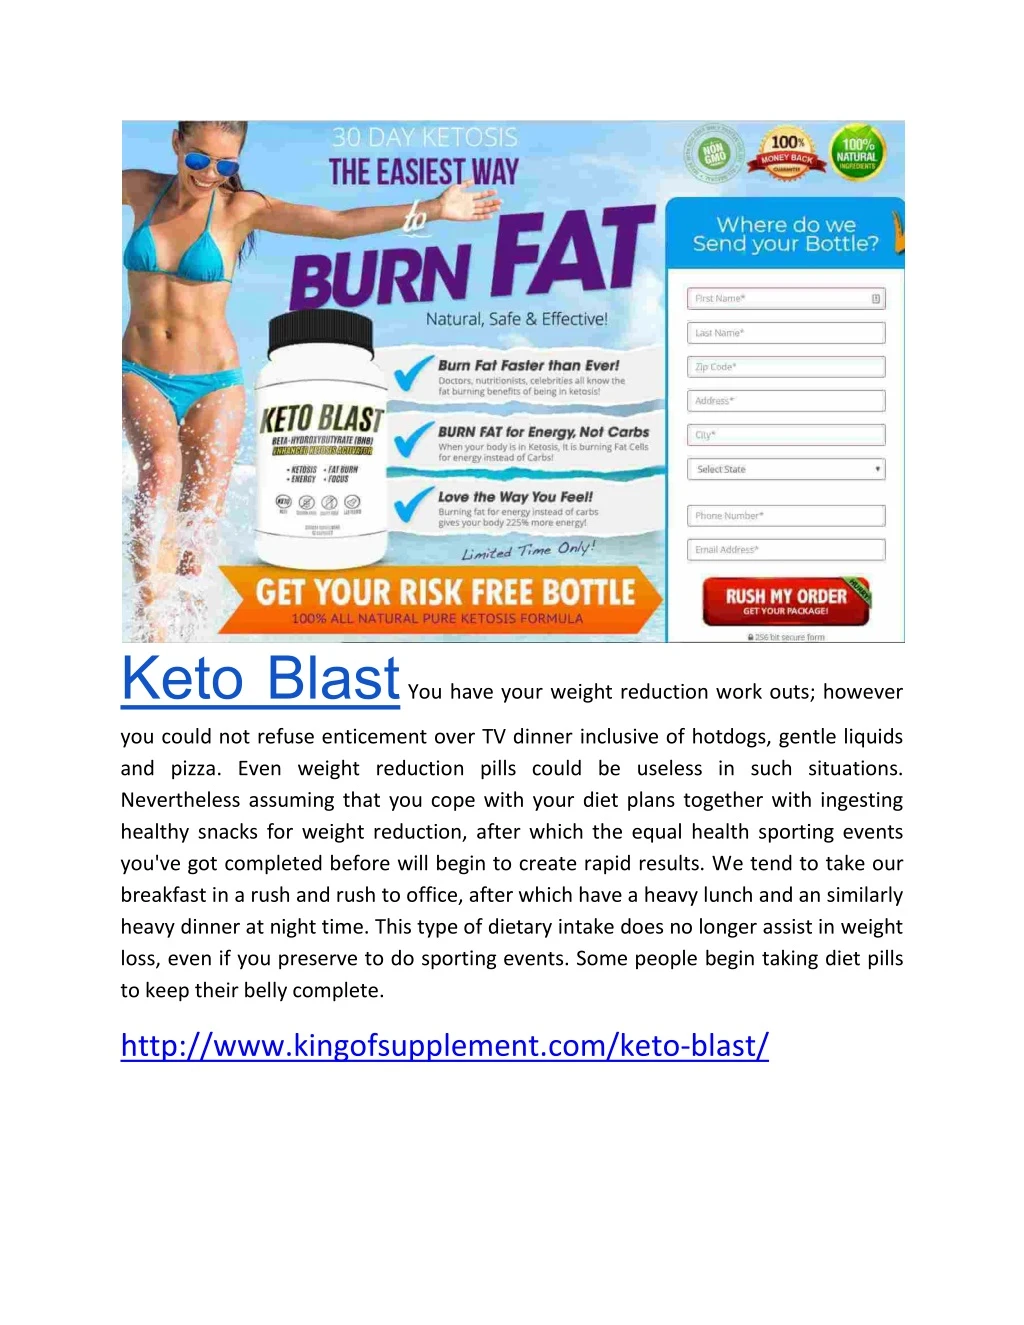 keto blast you have your weight reduction work